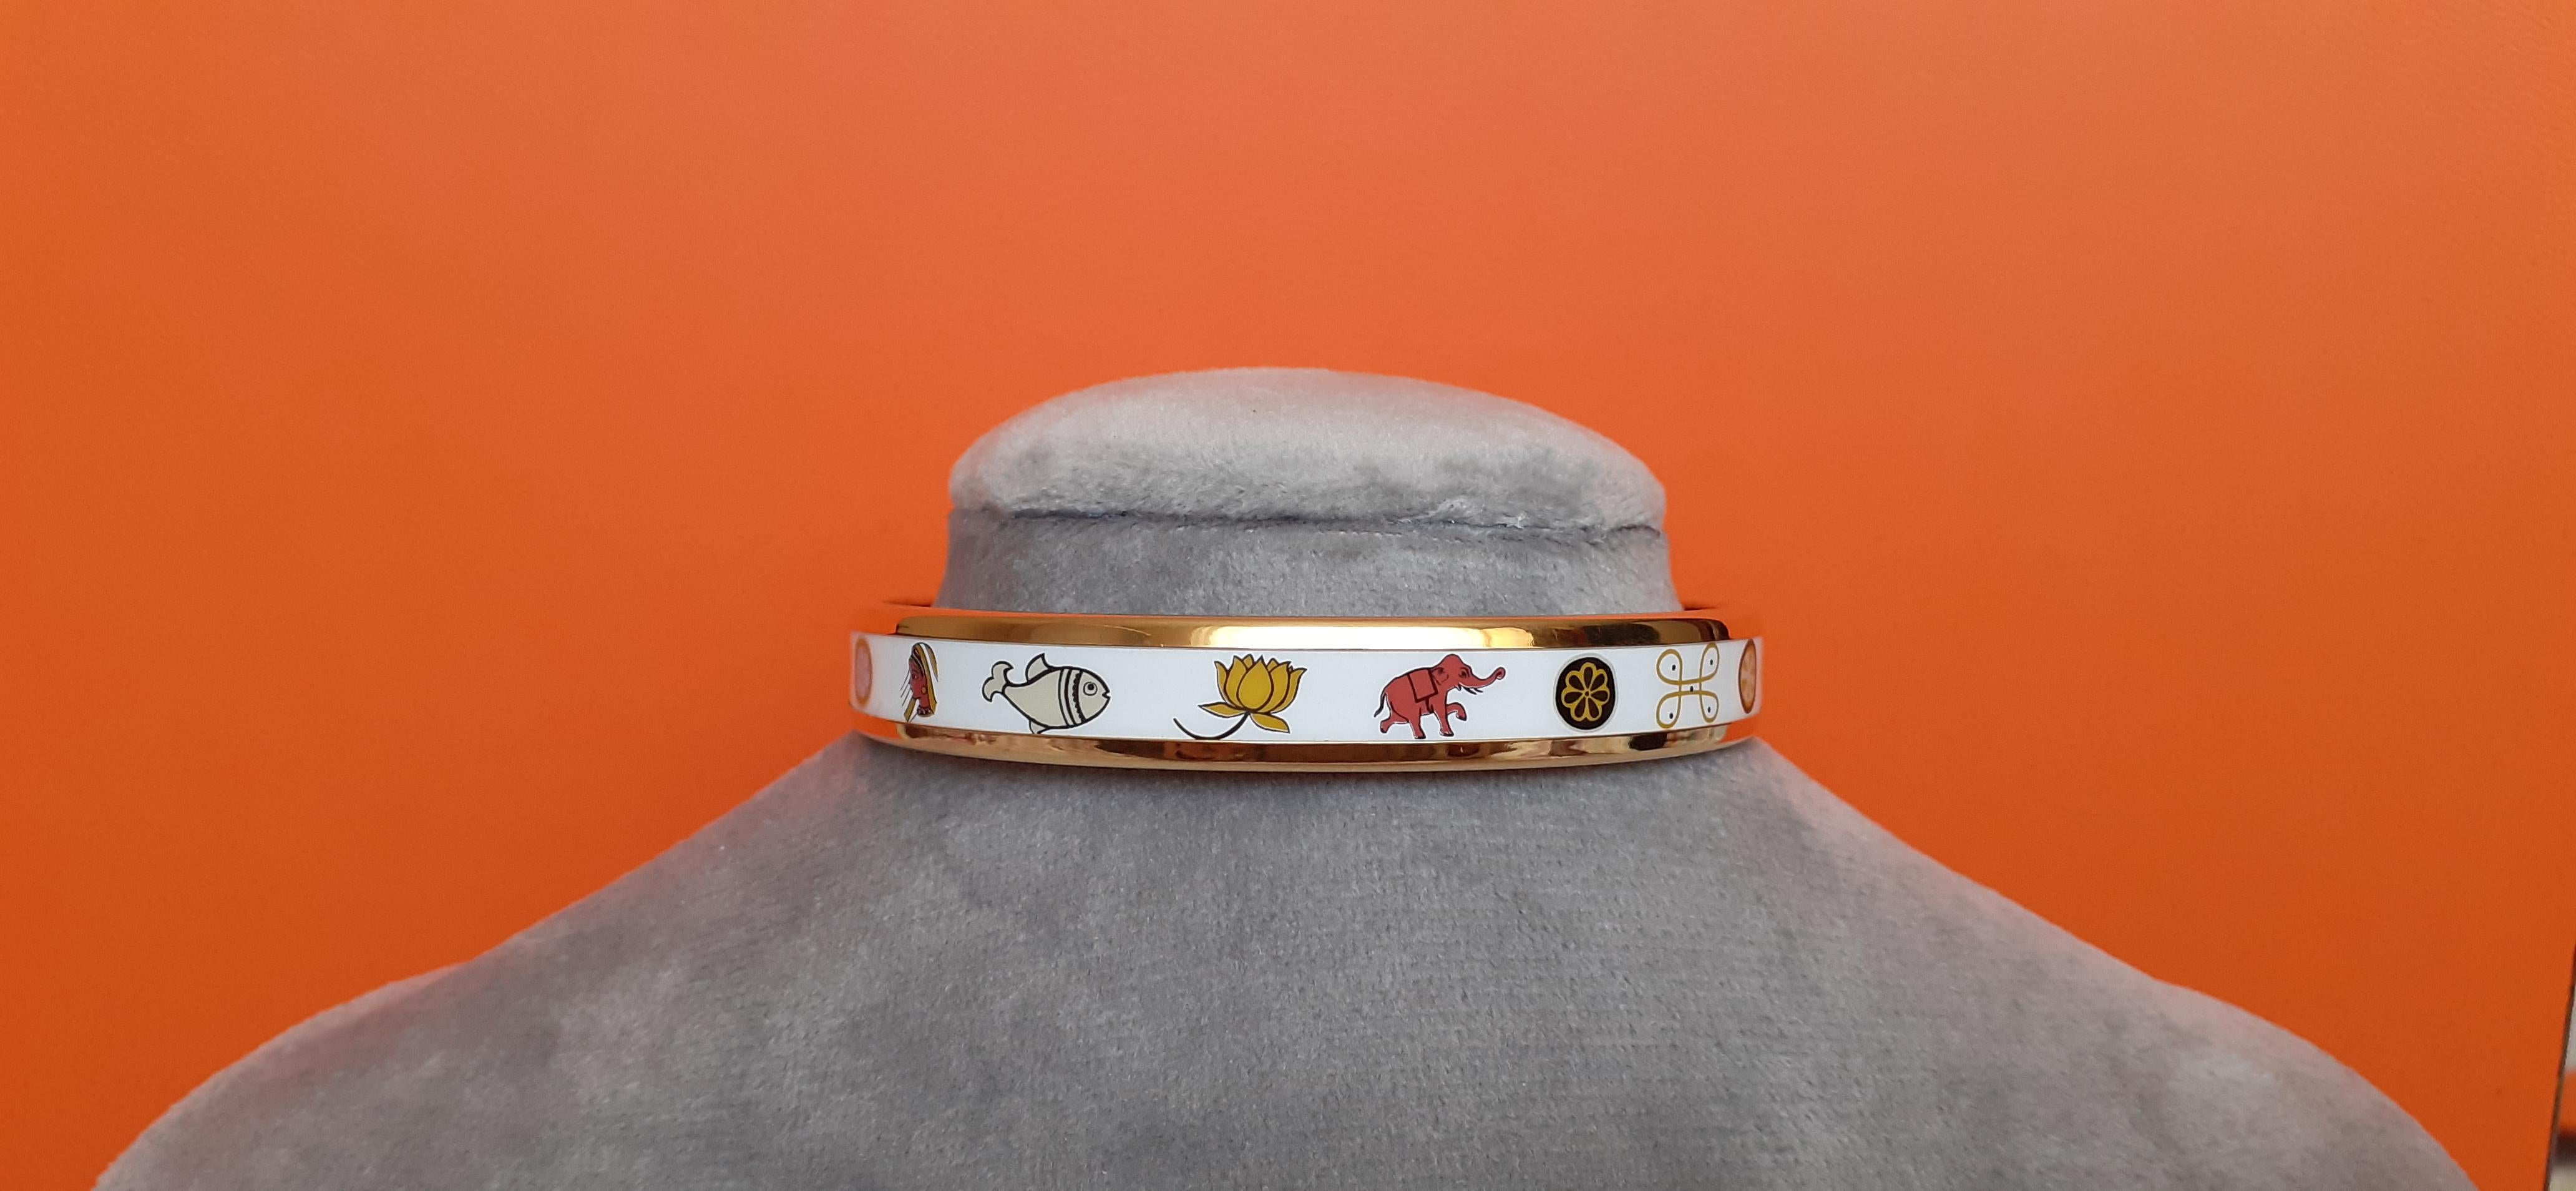 Super Cute and Lovely Authentic Hermès Bracelet

India themed designs

Very rare

